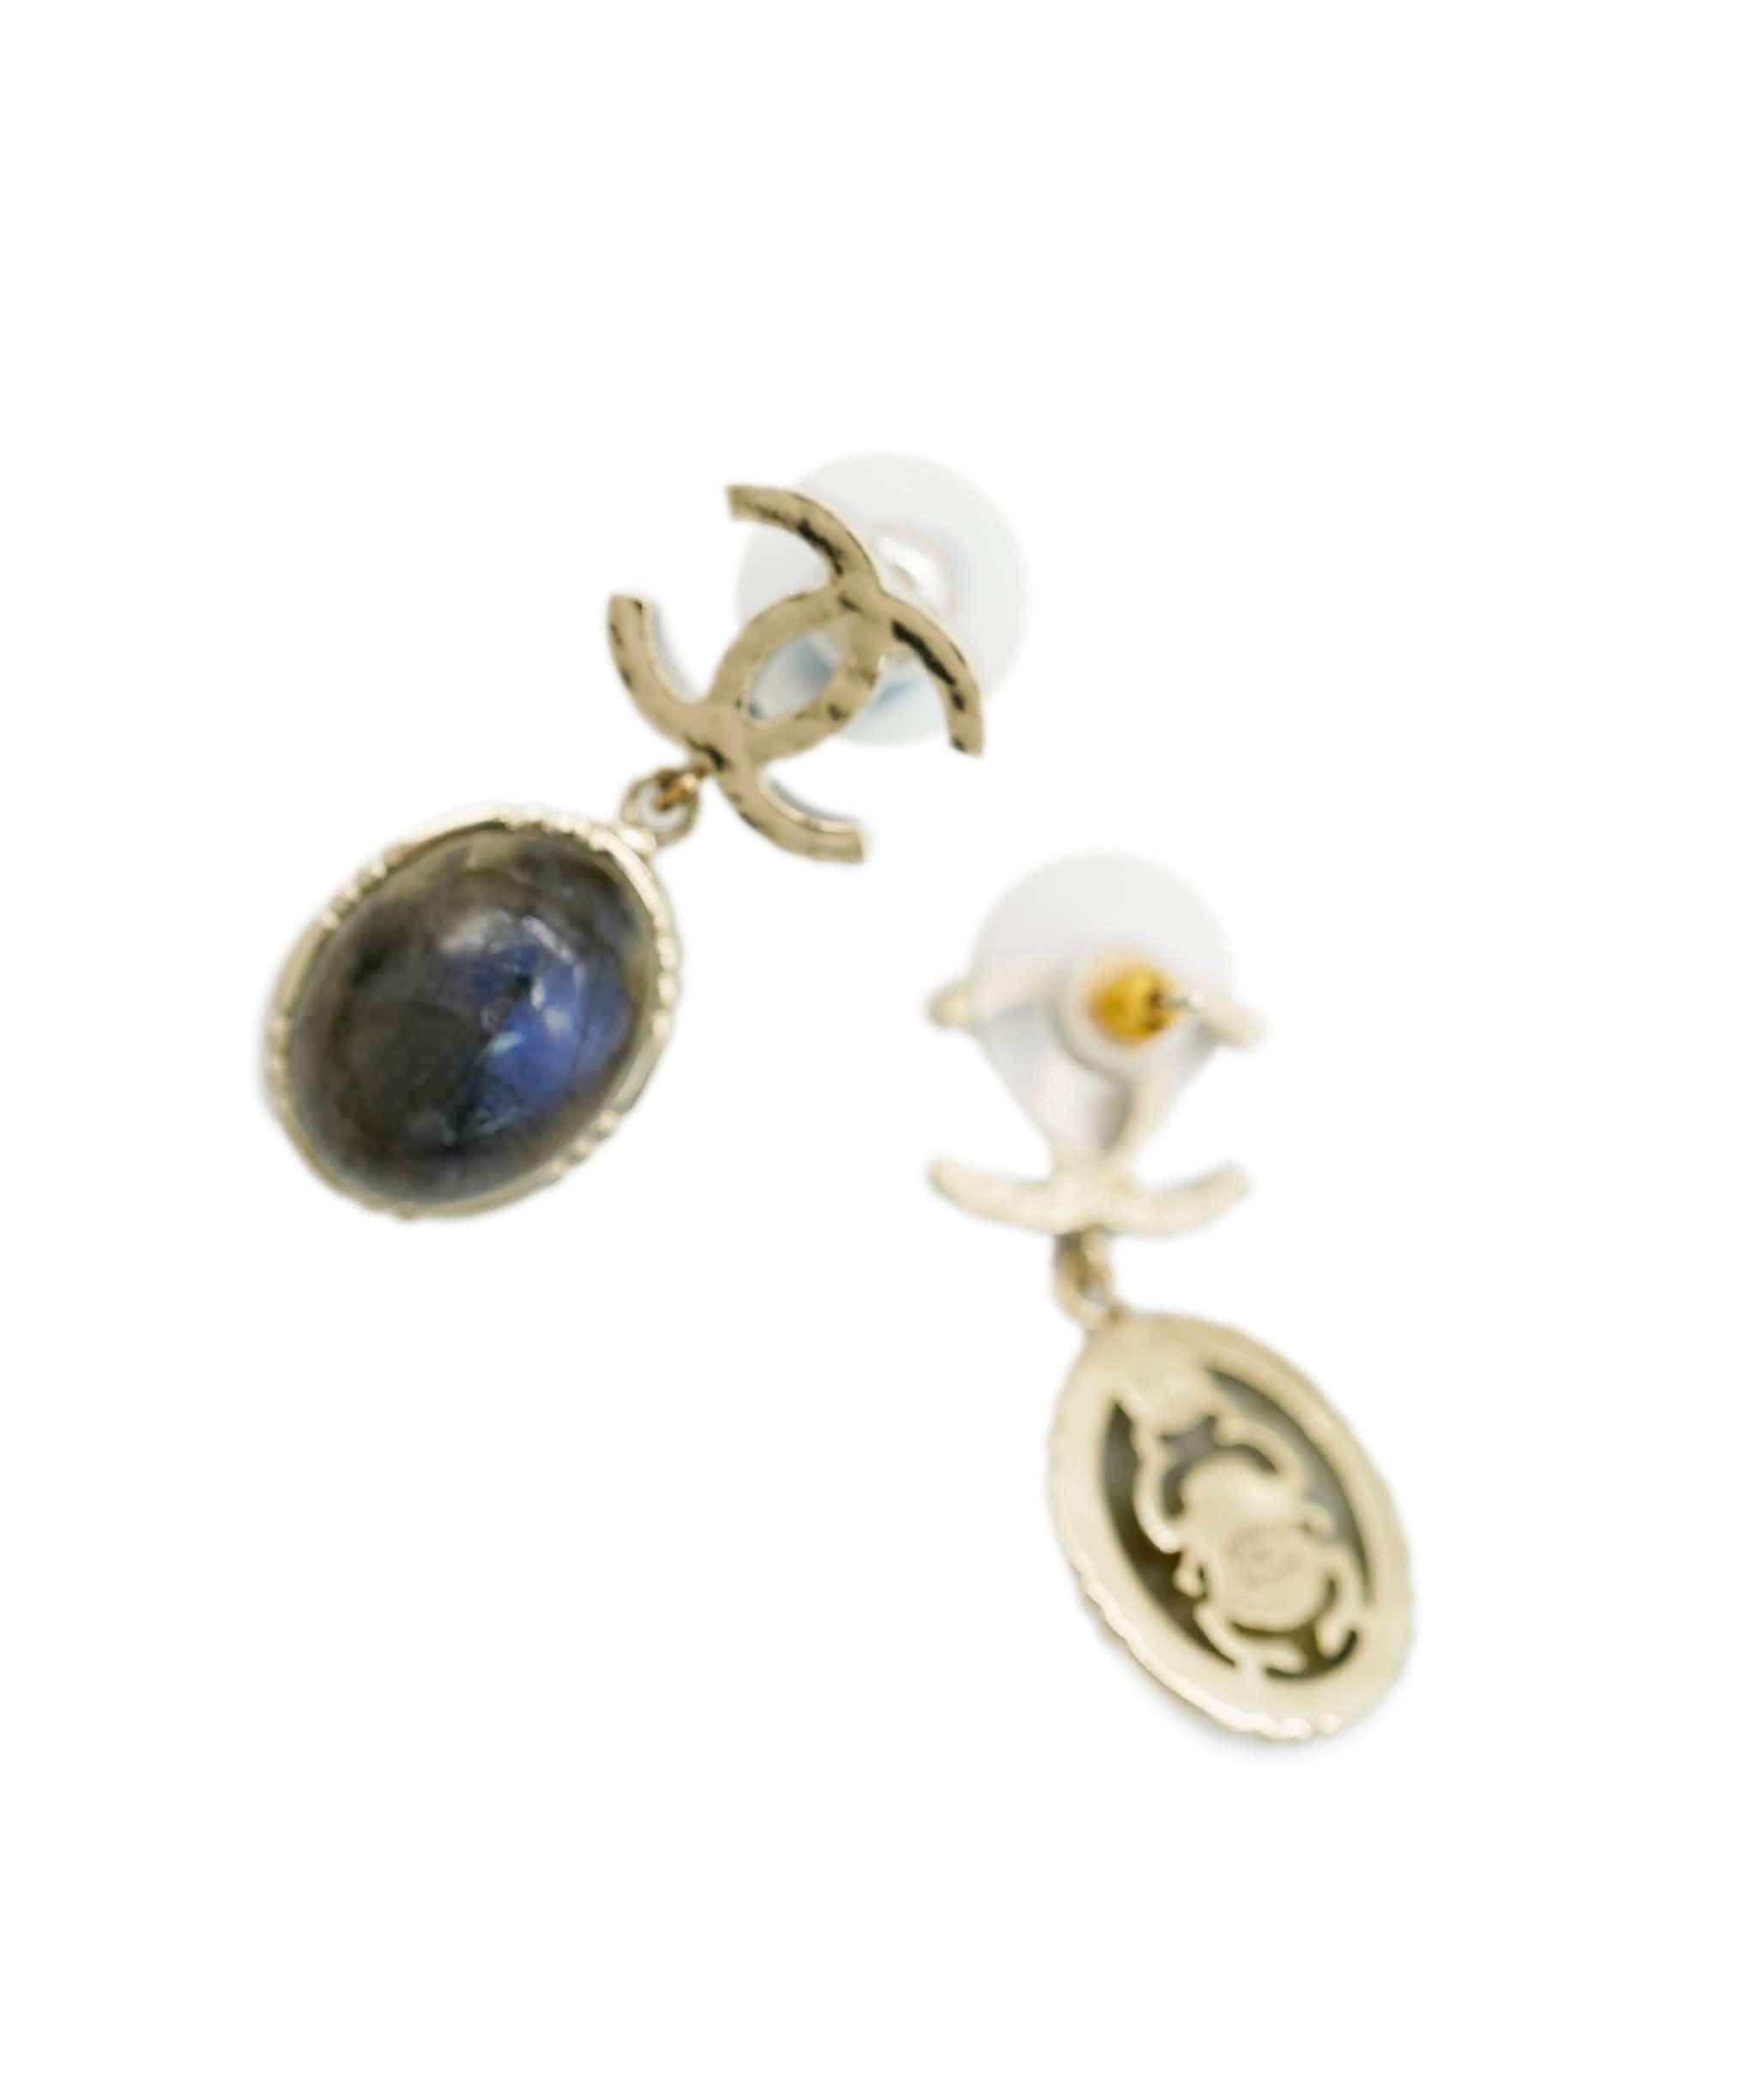 Chanel Chanel CC earrings with glass moonstone  ADC1176